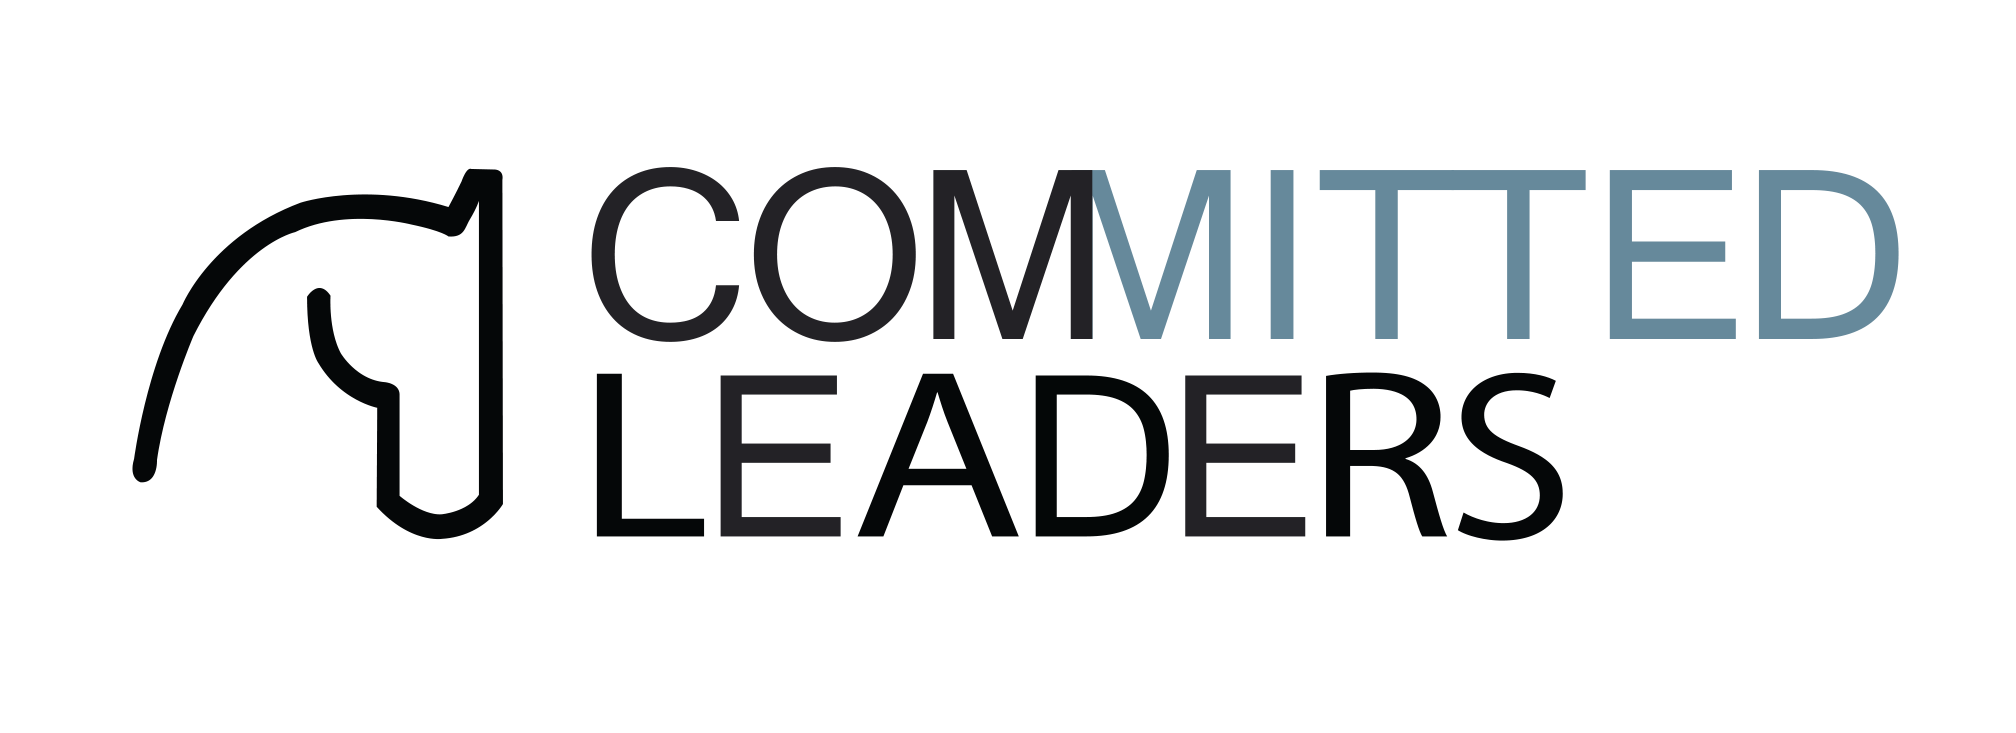 COMMITTED LEADERS